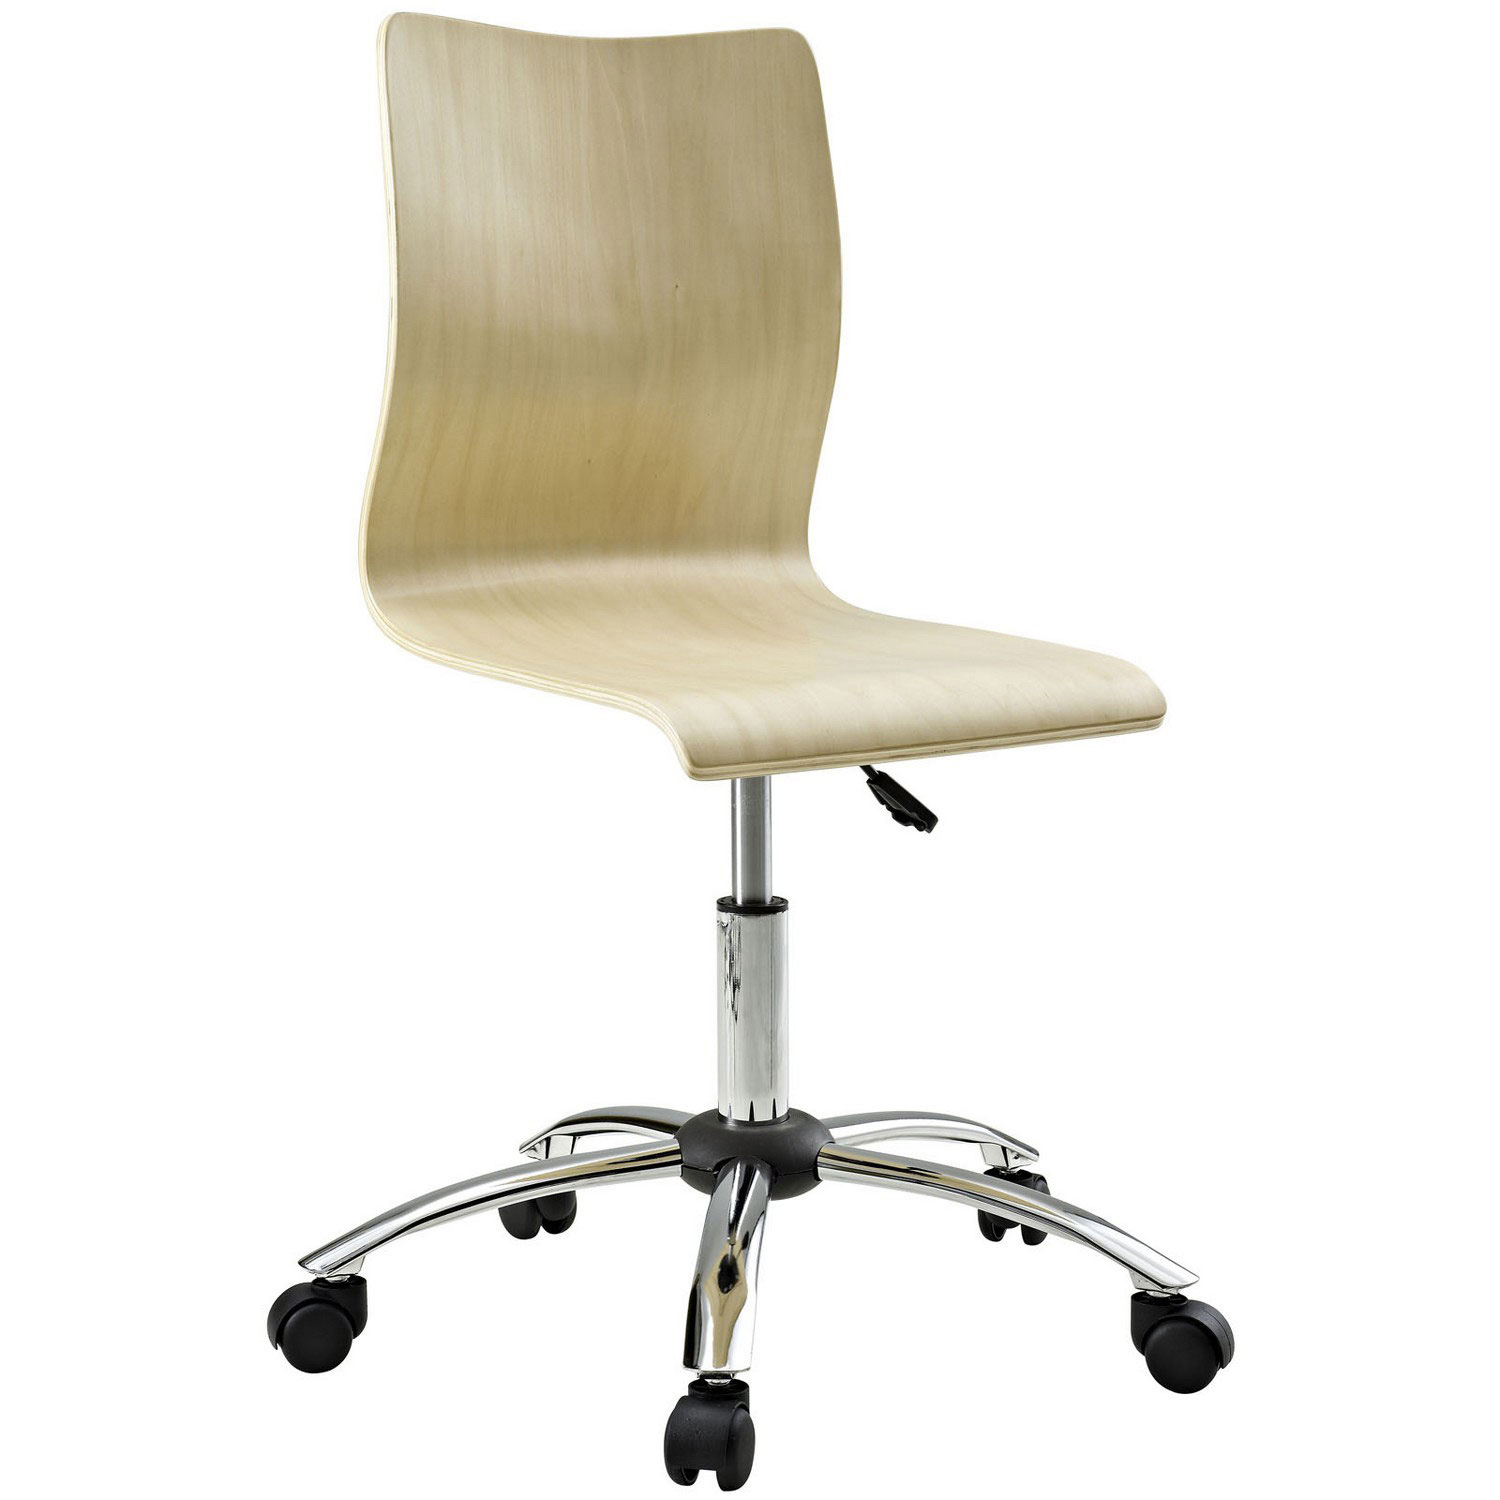 Modway Fashion Armless Office Chair - Natural